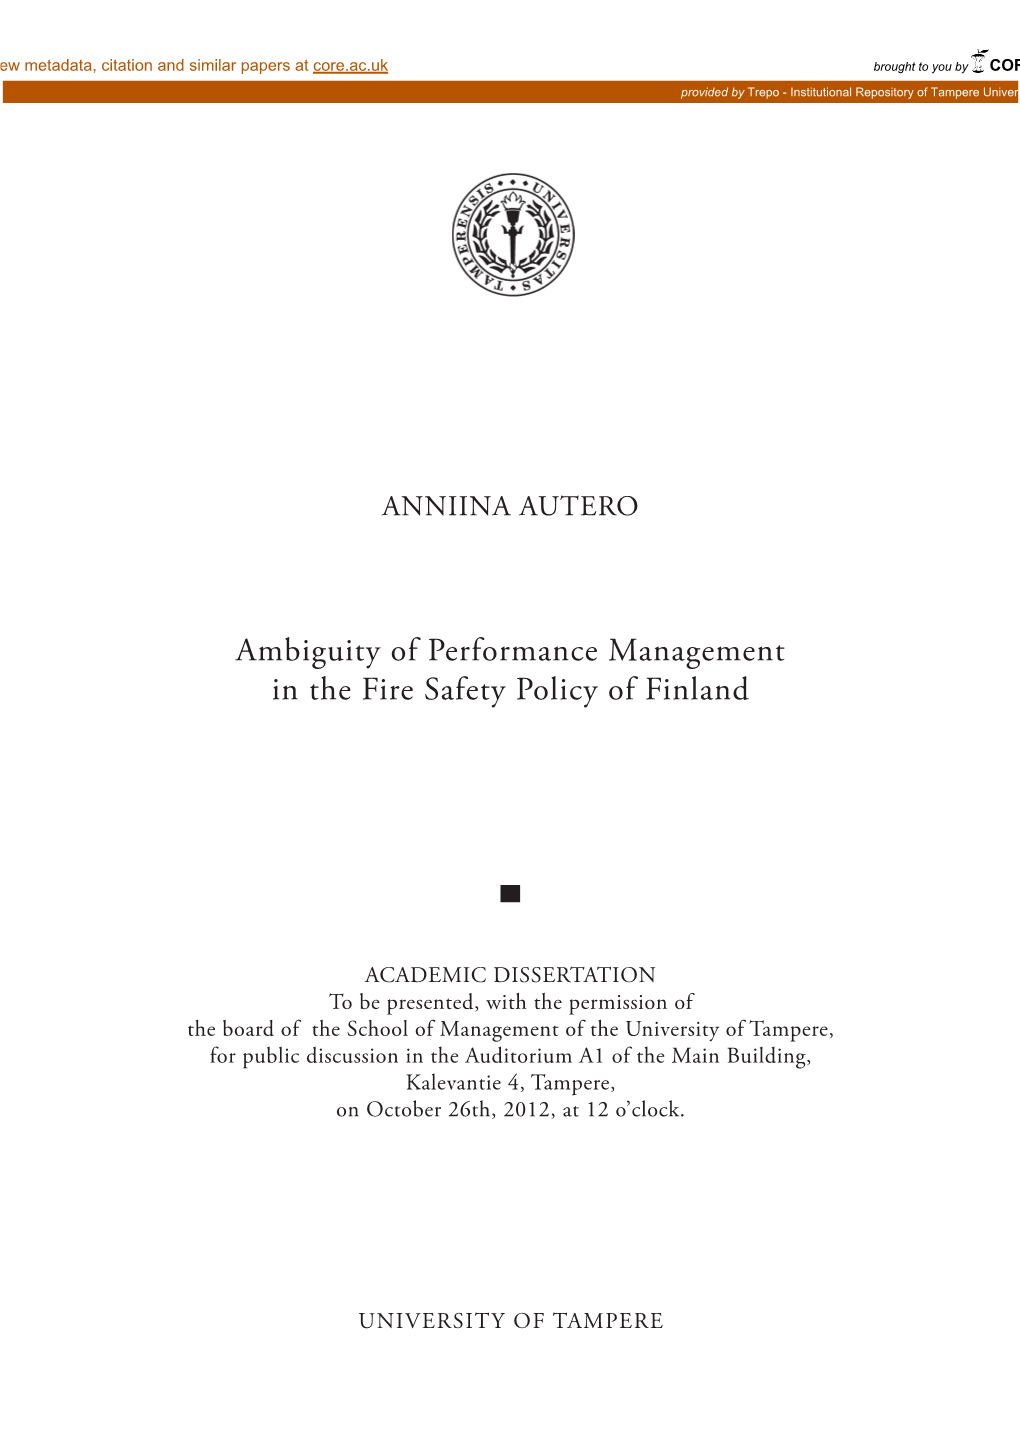 Ambiguity of Performance Management in the Fire Safety Policy of Finland